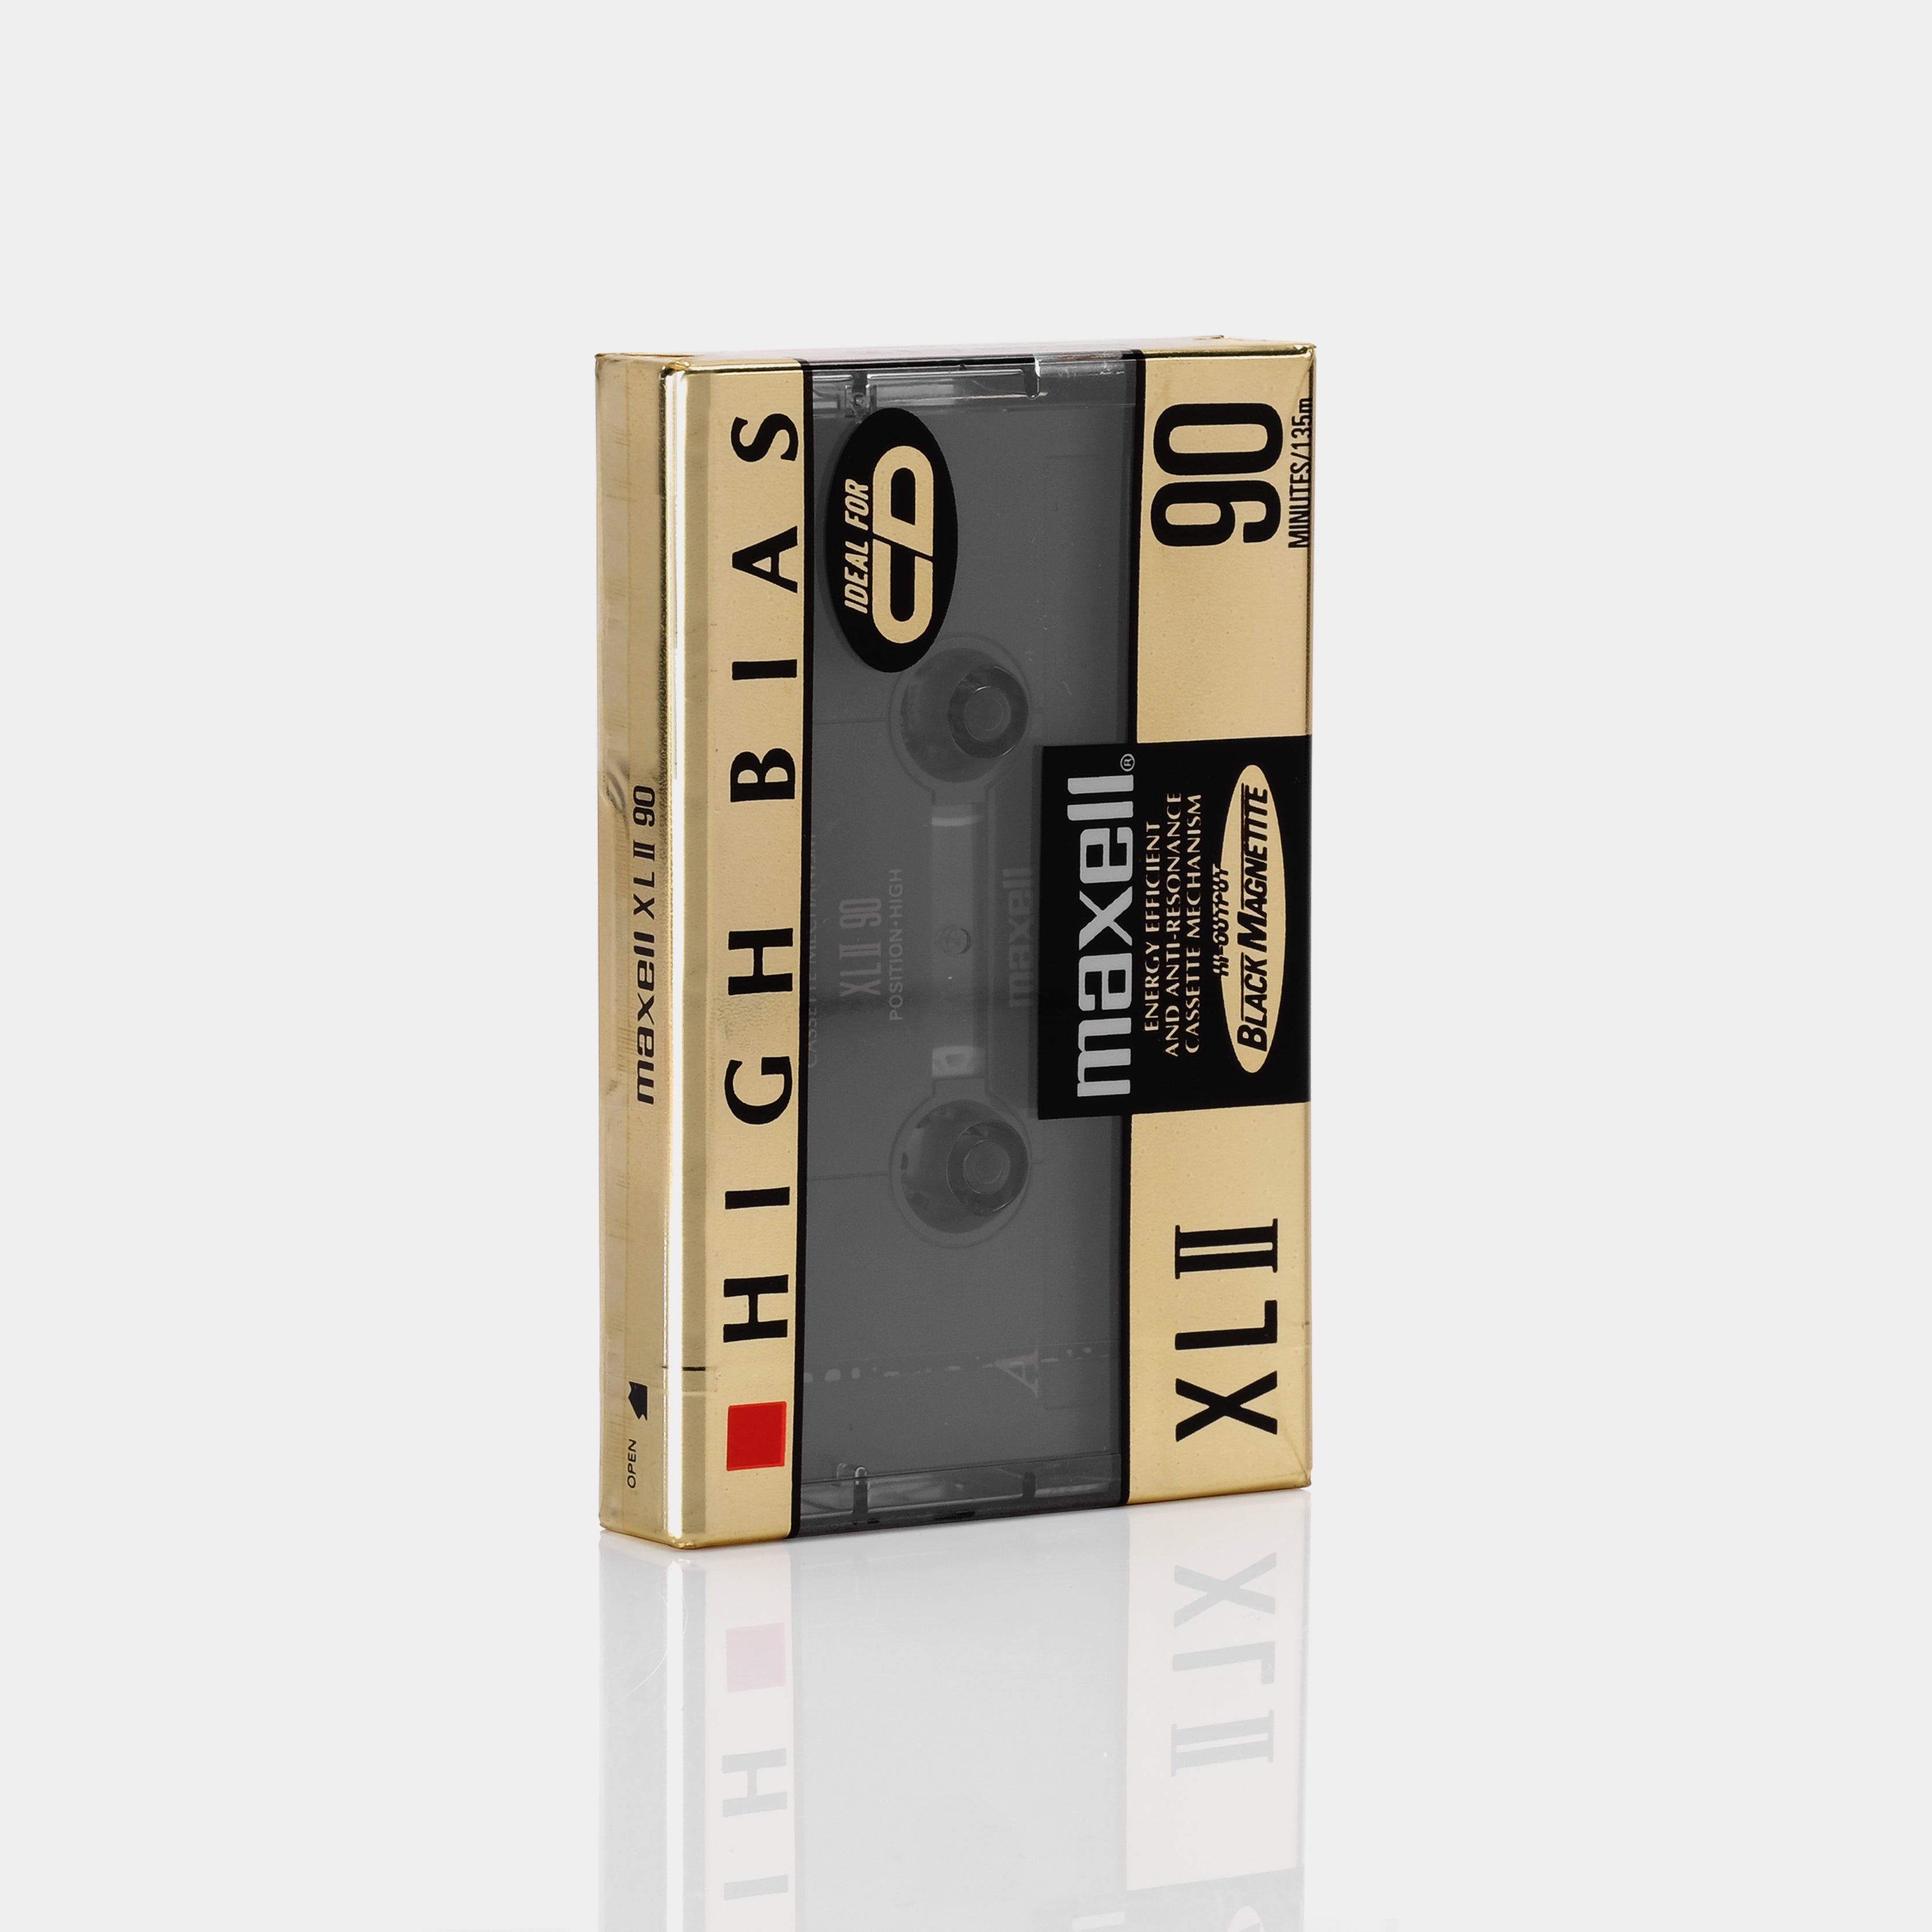 Maxell XLII 90 High Bias Blank Recordable Cassette Tape